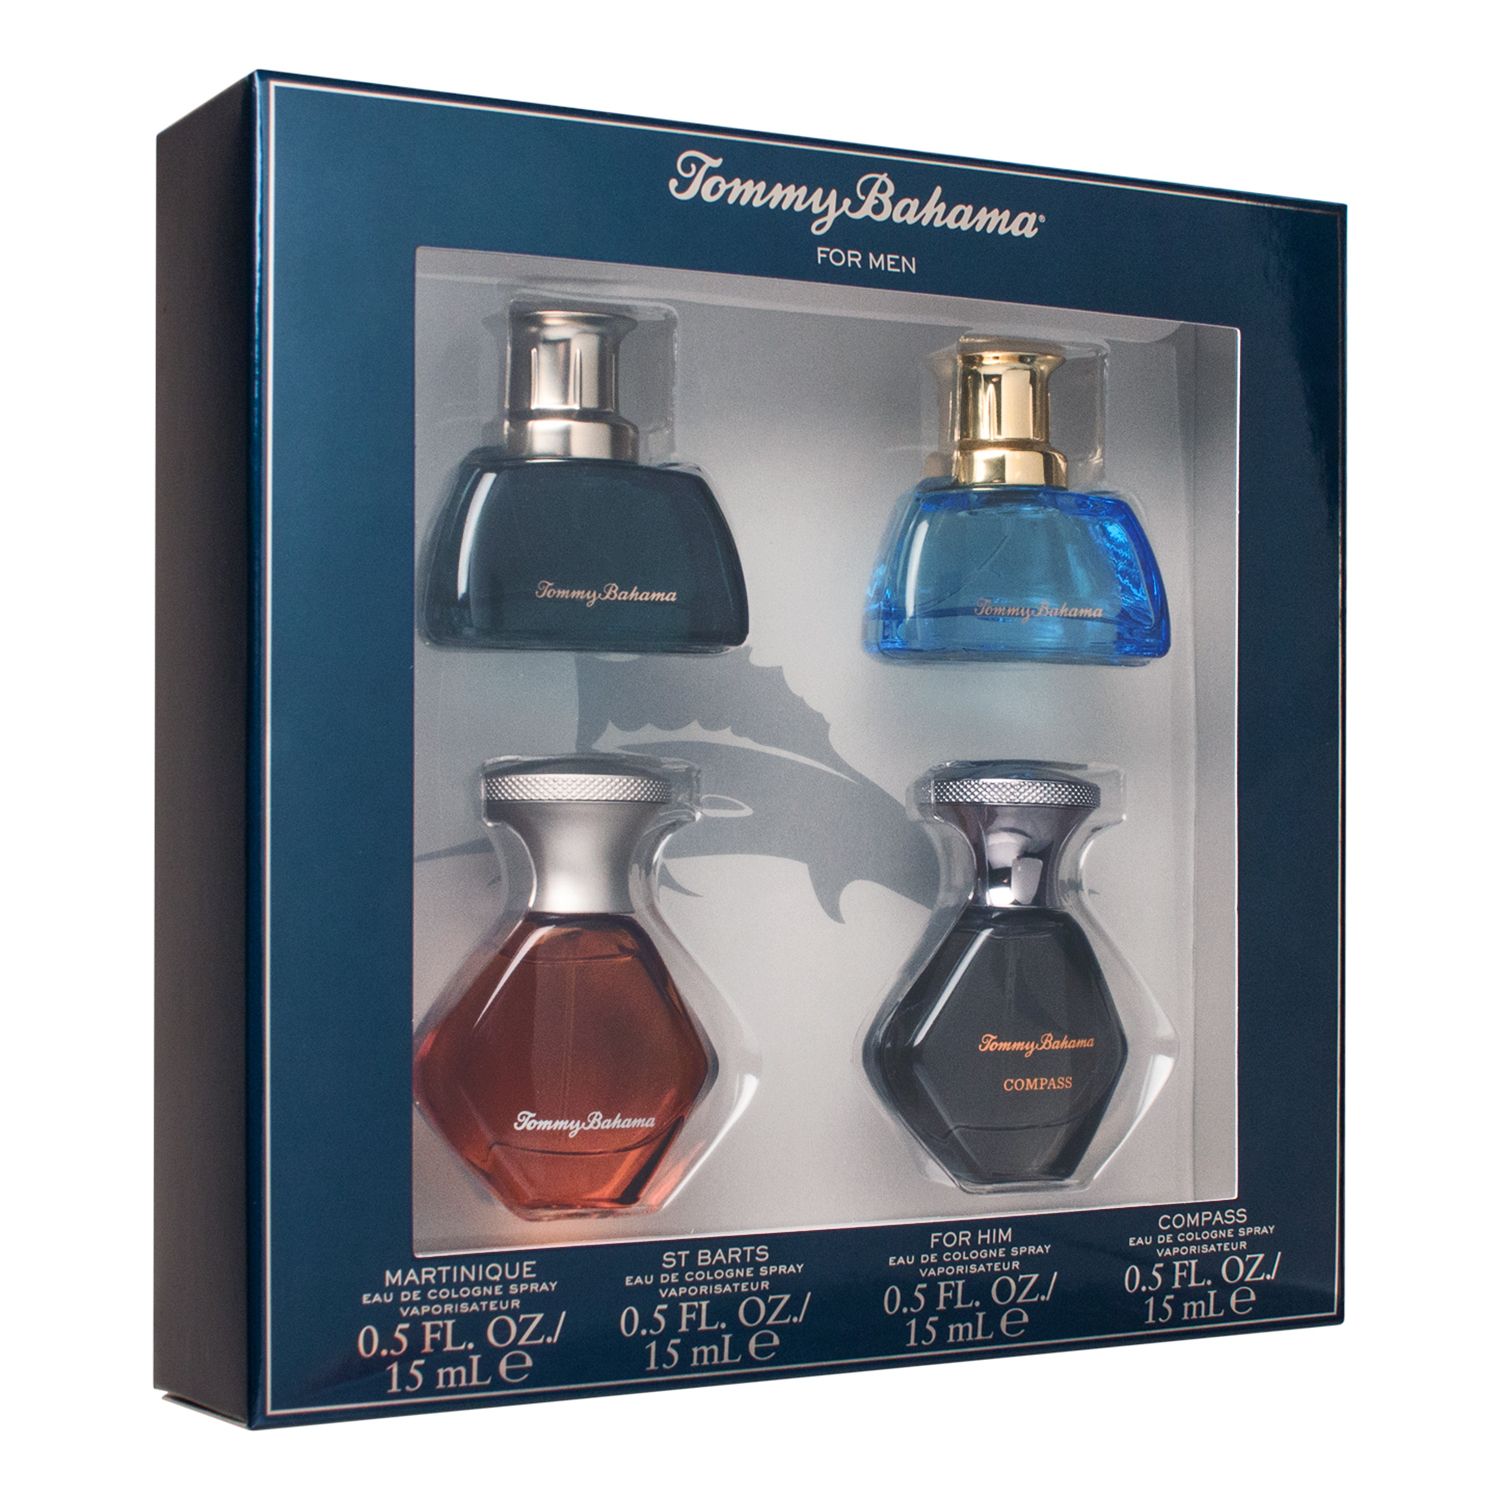 tommy bahama compass gift set